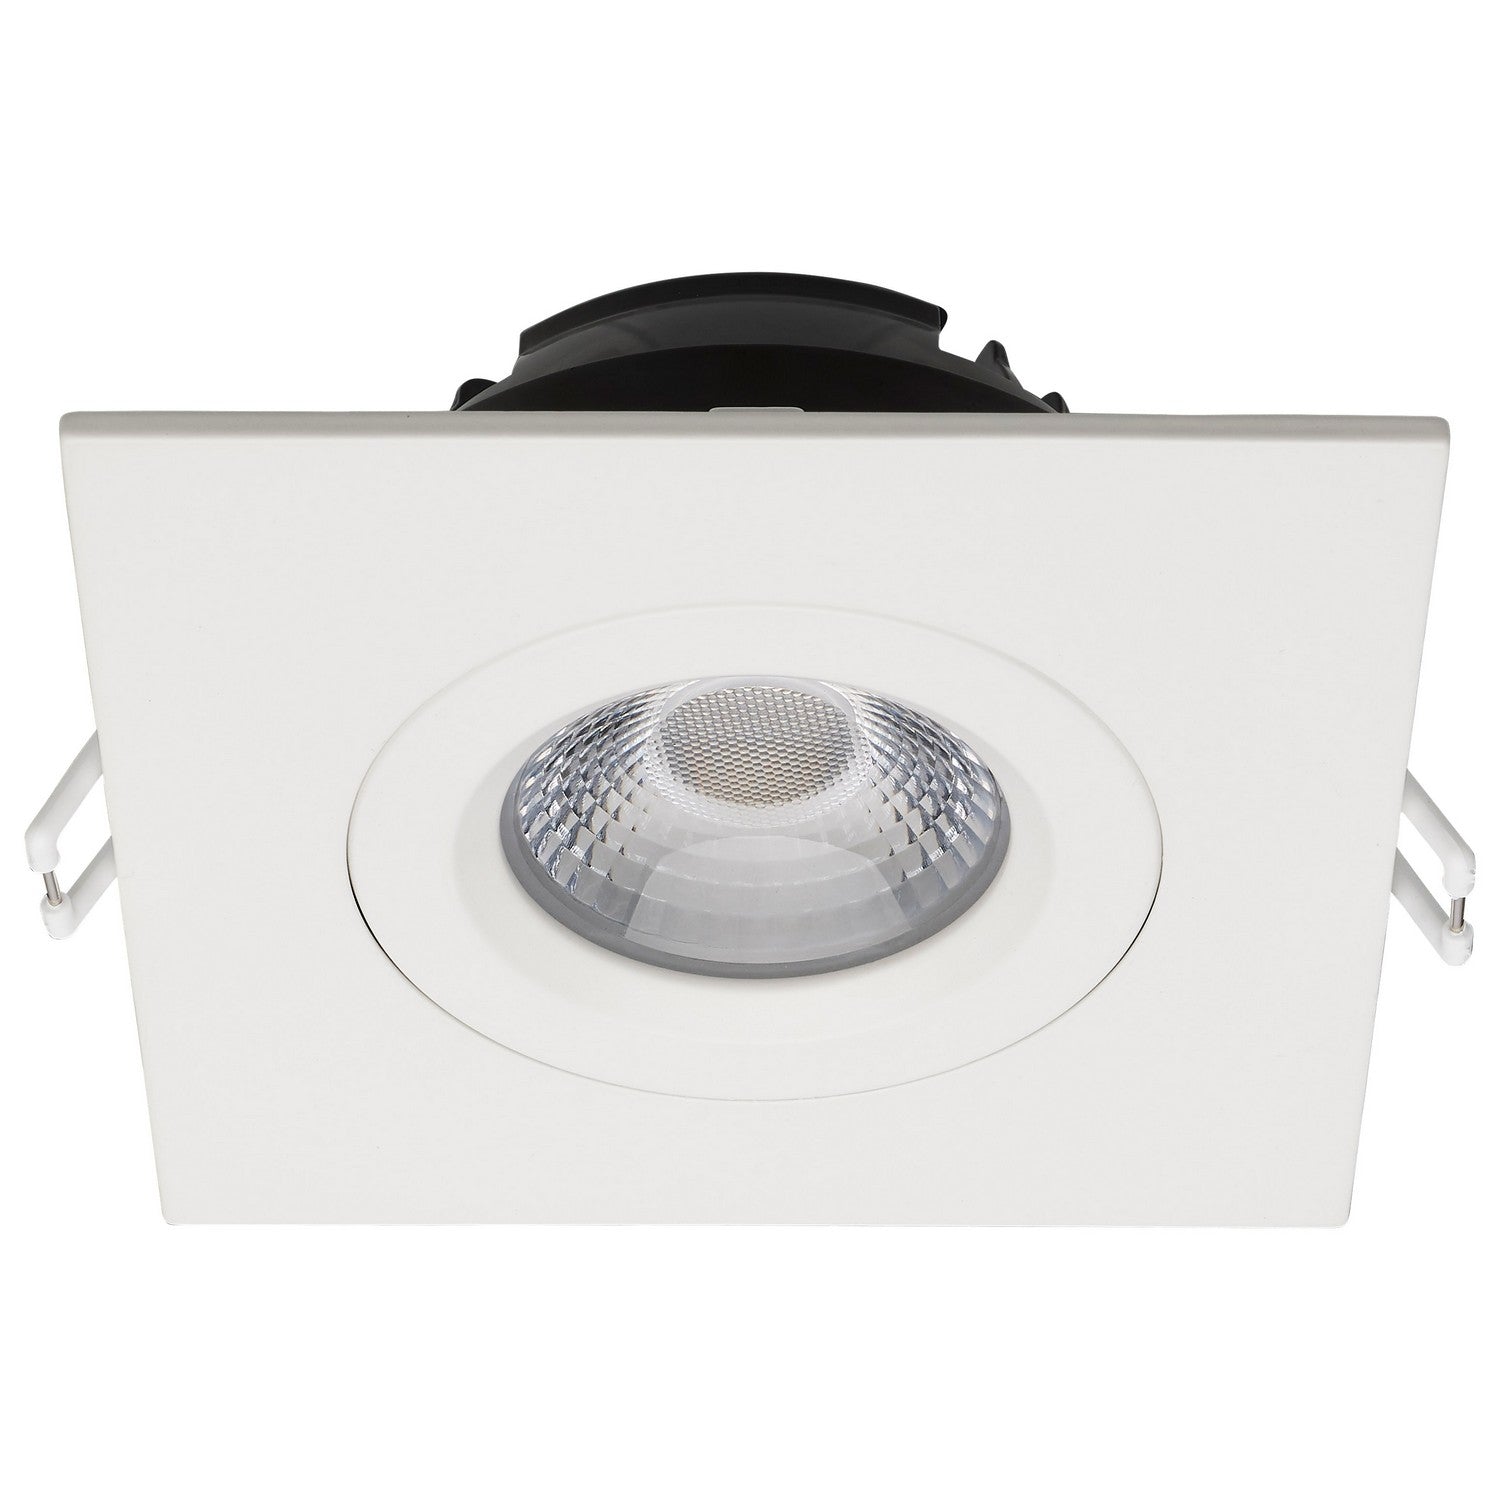 LED Downlight by Satco in White Finish (S11621R1)